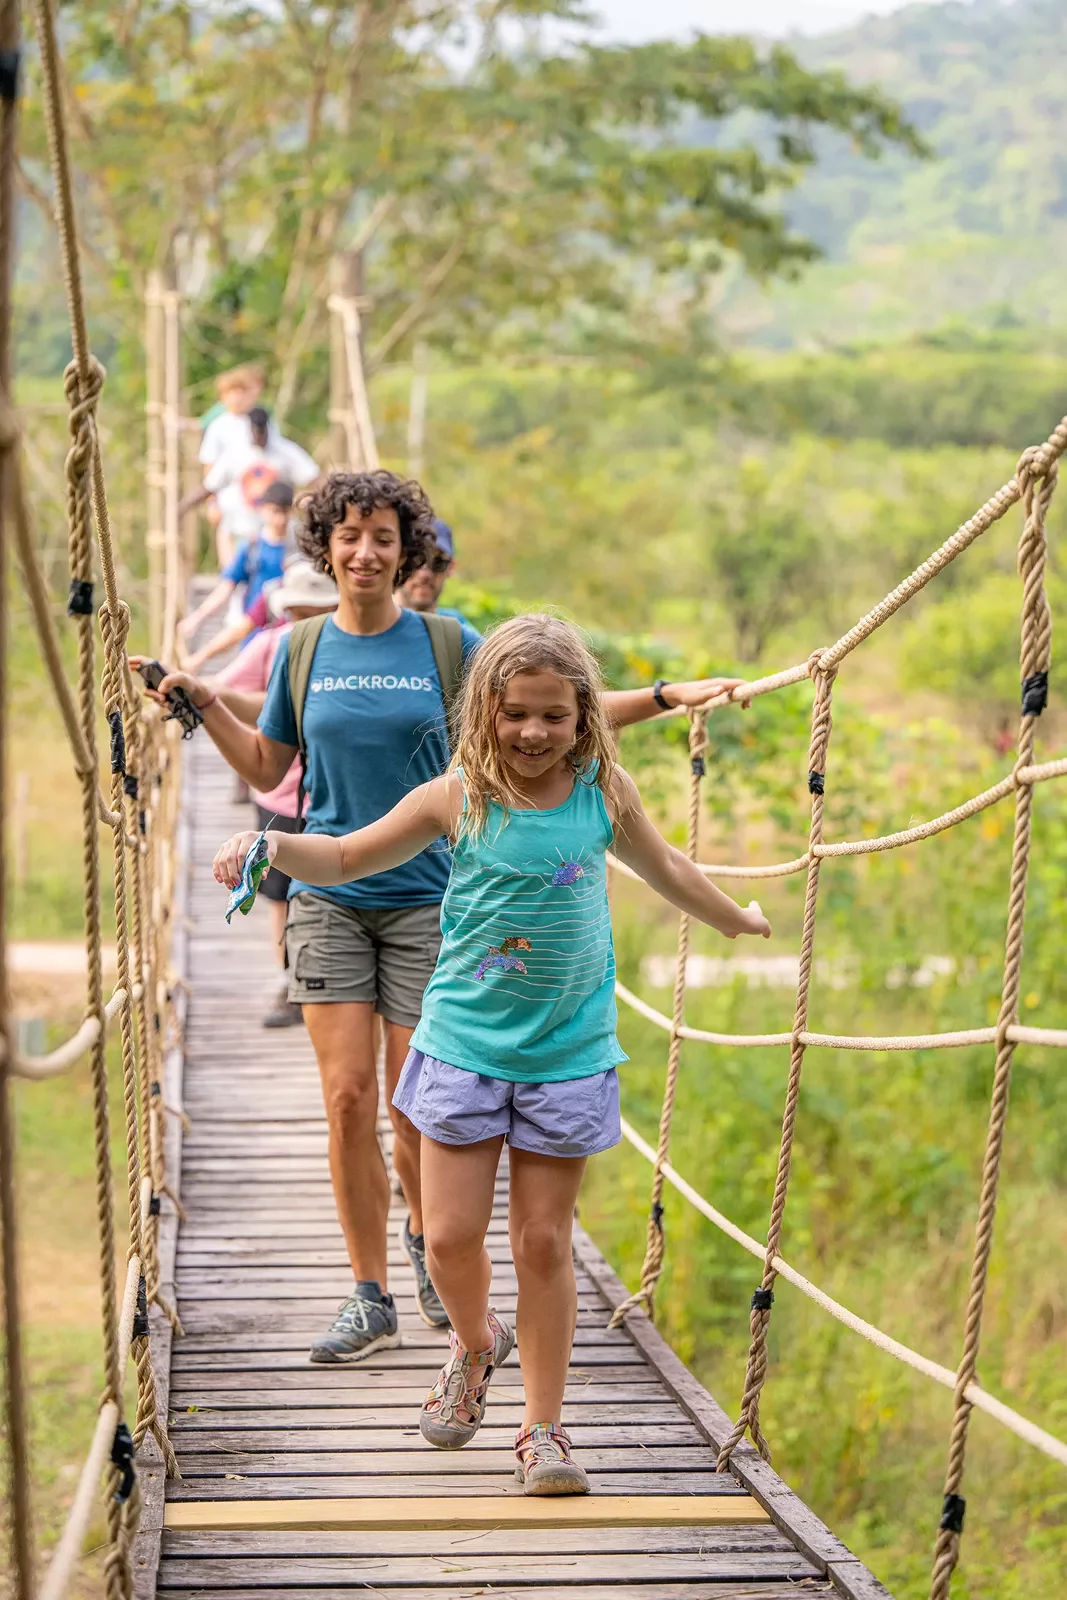 Group of hikers and children on a wooden rope bridge